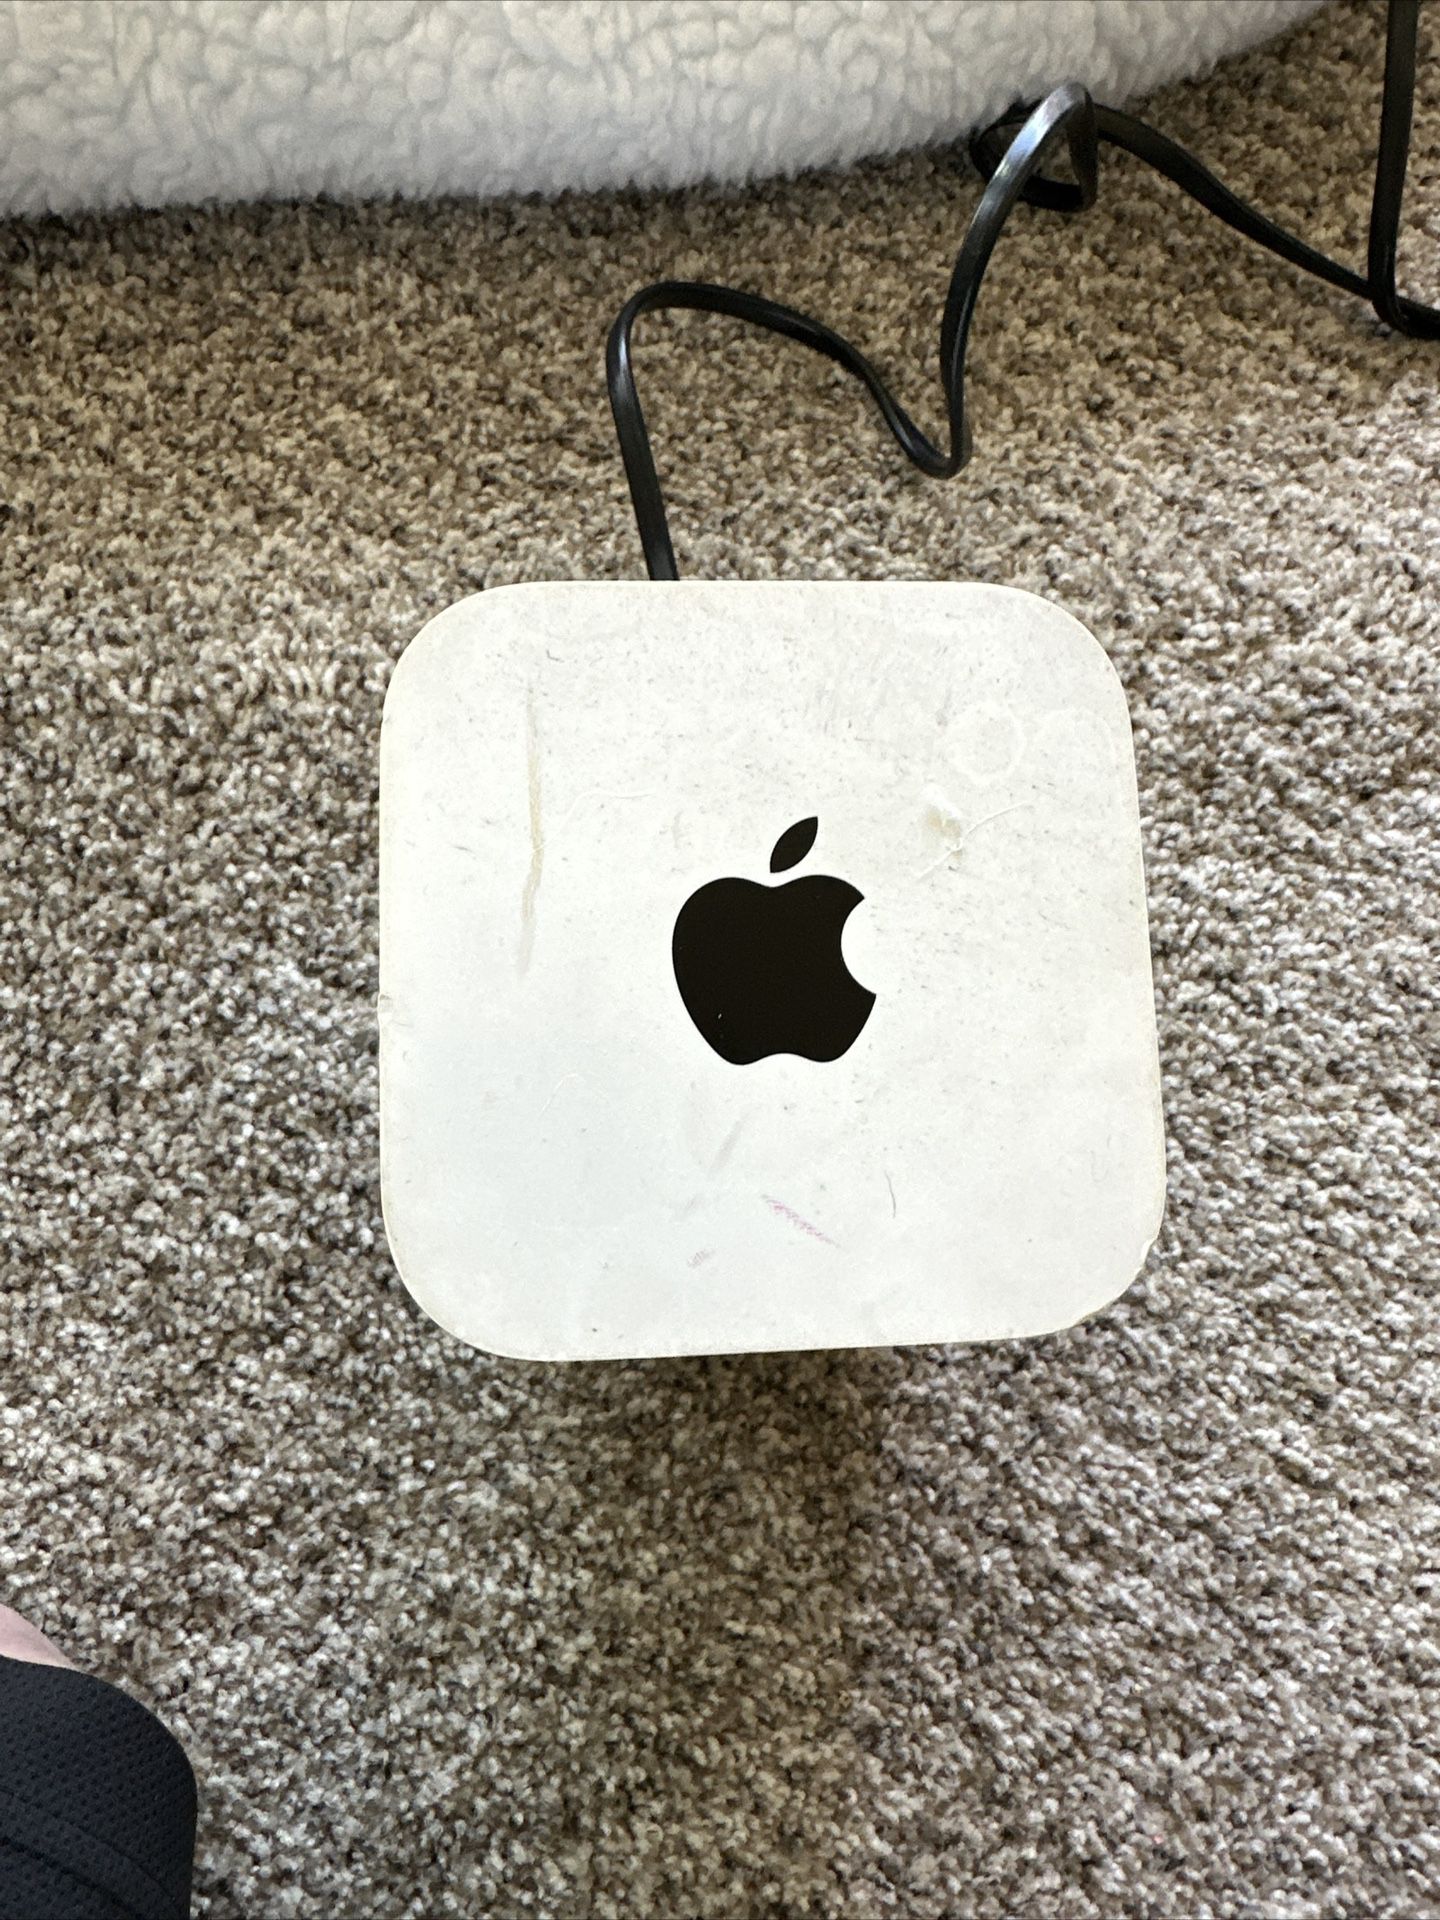 Apple AirPort Extreme Base Station Wireless Router 6th Generation A1521.  